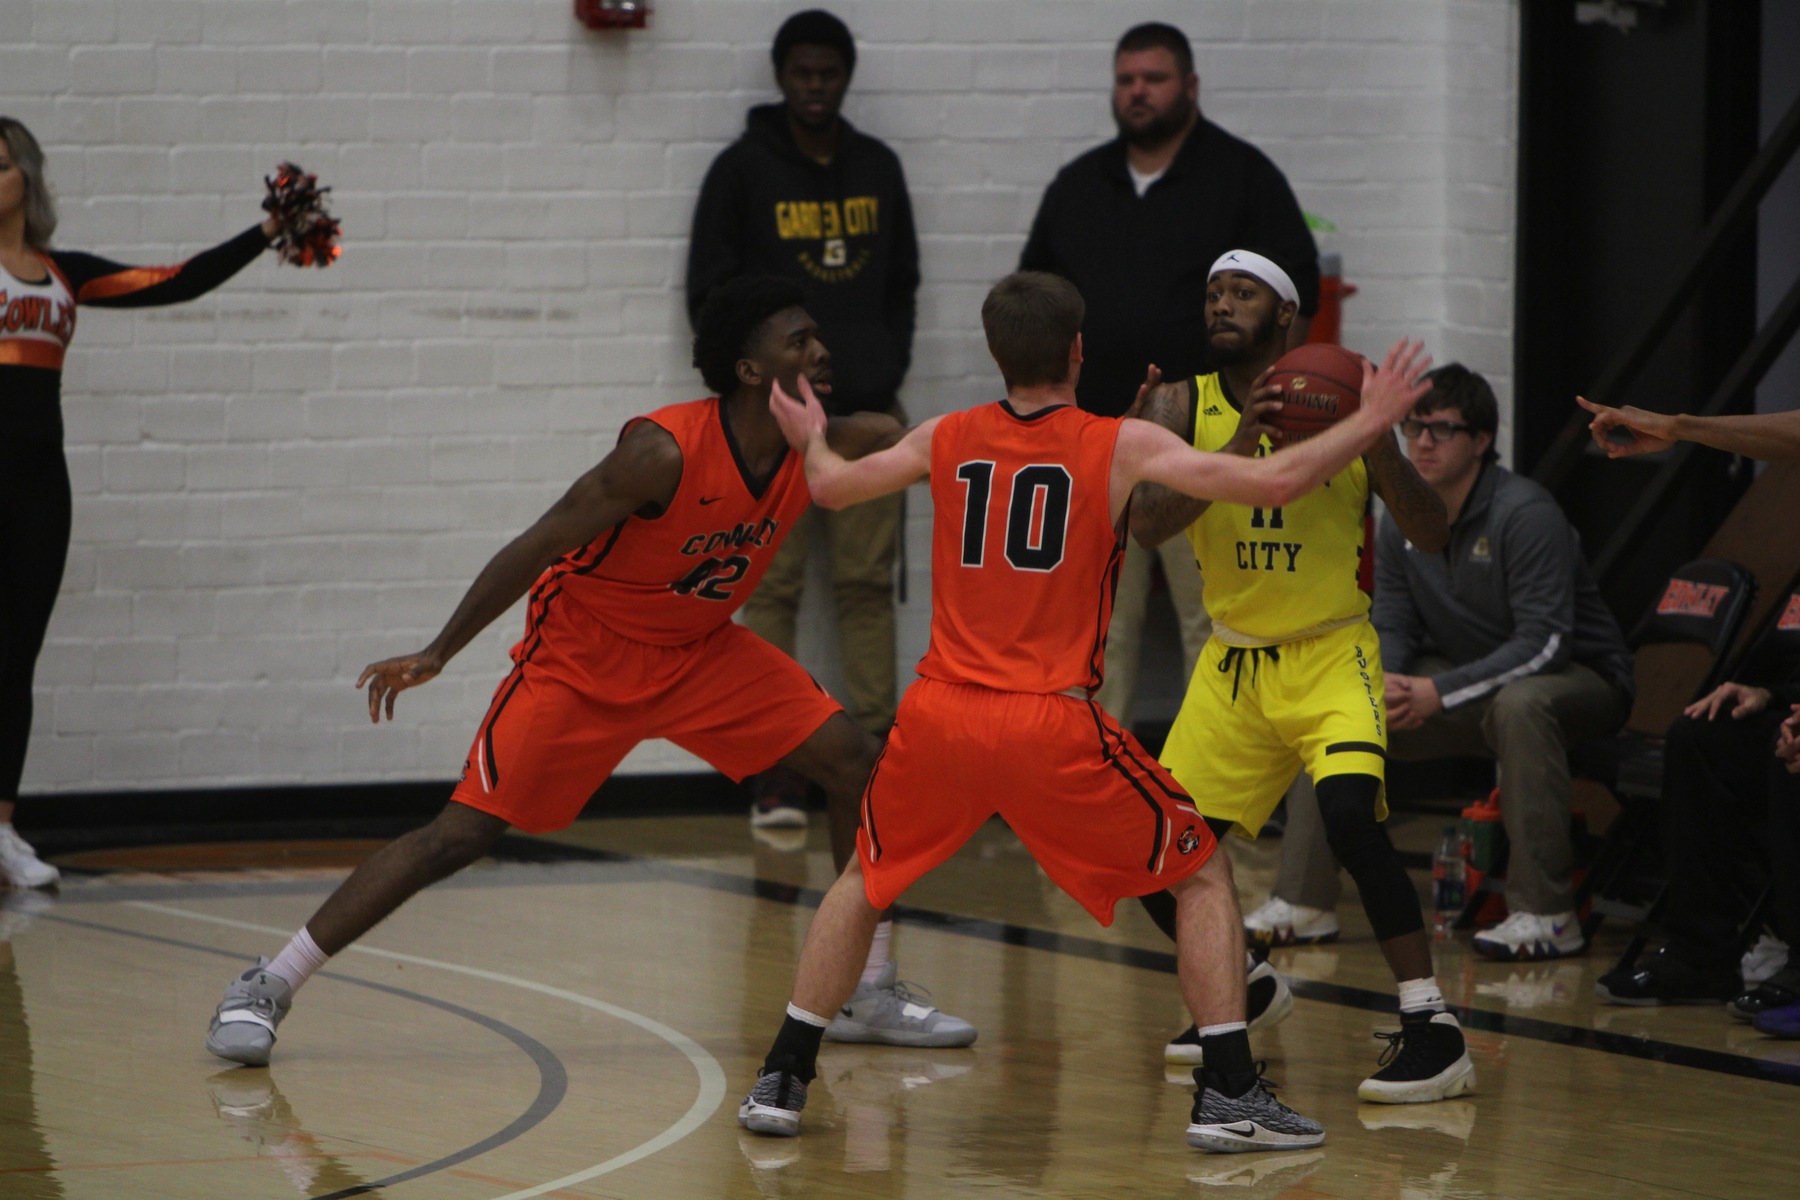 Cowley clips Broncbusters with strong second half